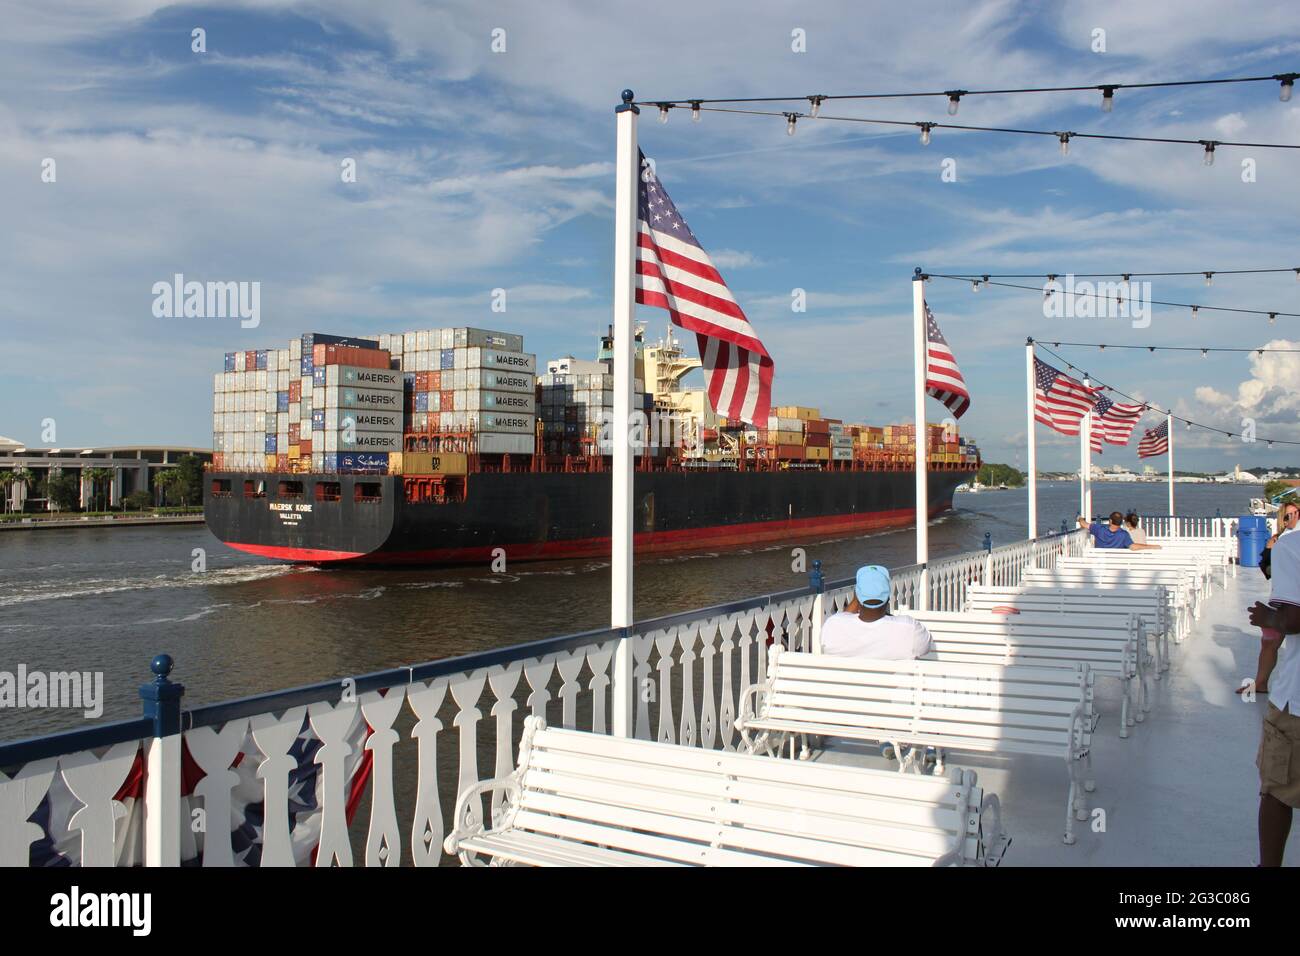 Massive carge ship passing a Paddlesteamer on the Savannah River USA Stock Photo